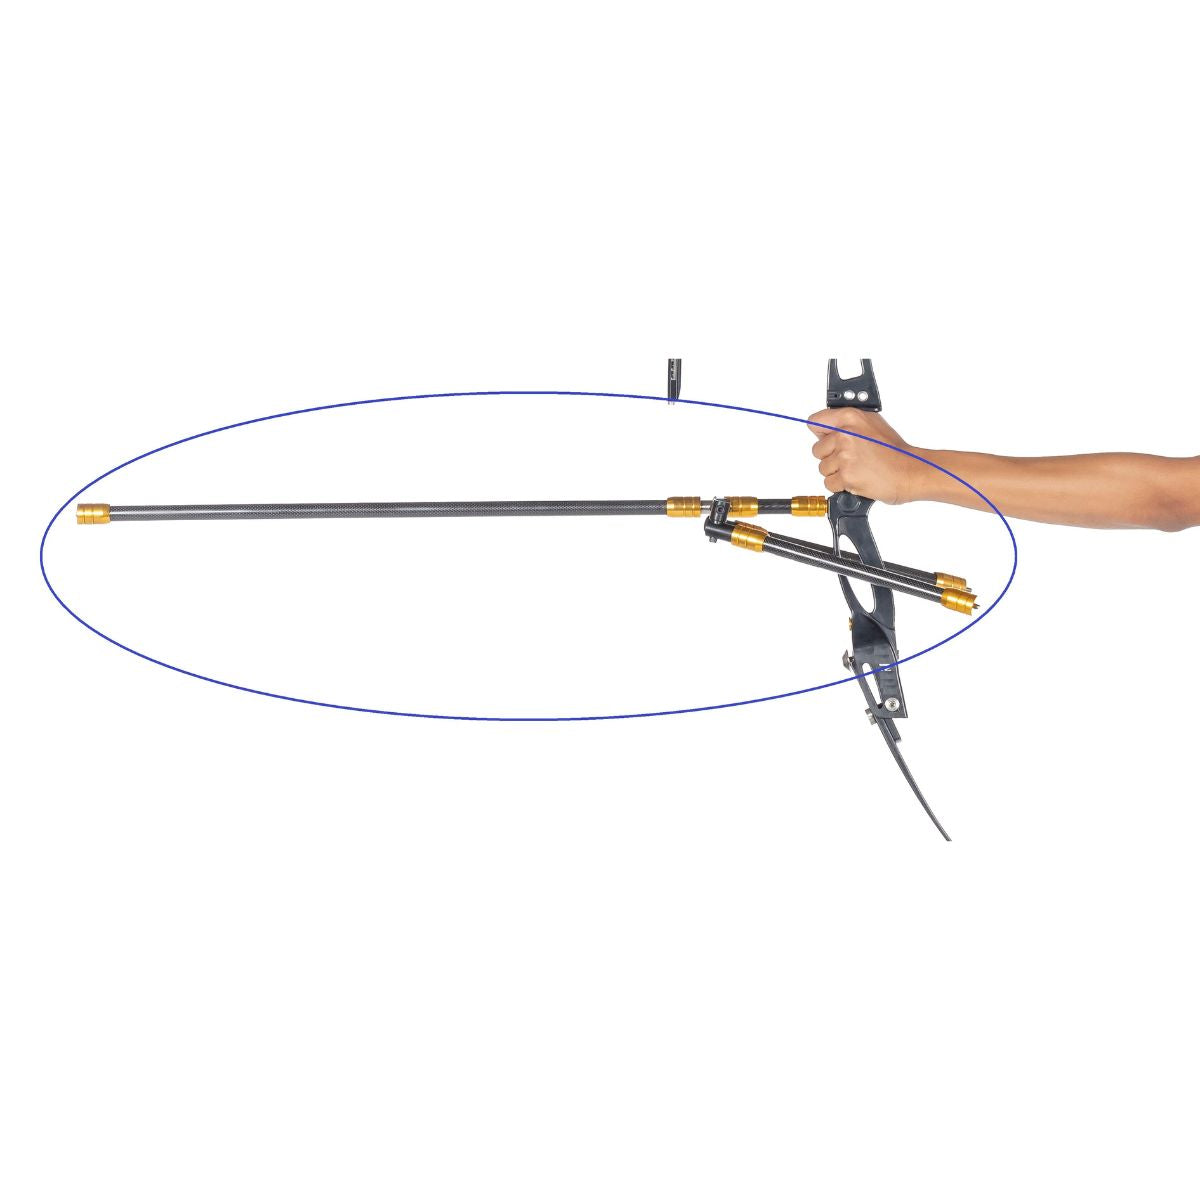 Re-Curve Professional Stabilizer - ARCPS - 01 - Archery Equipment 3